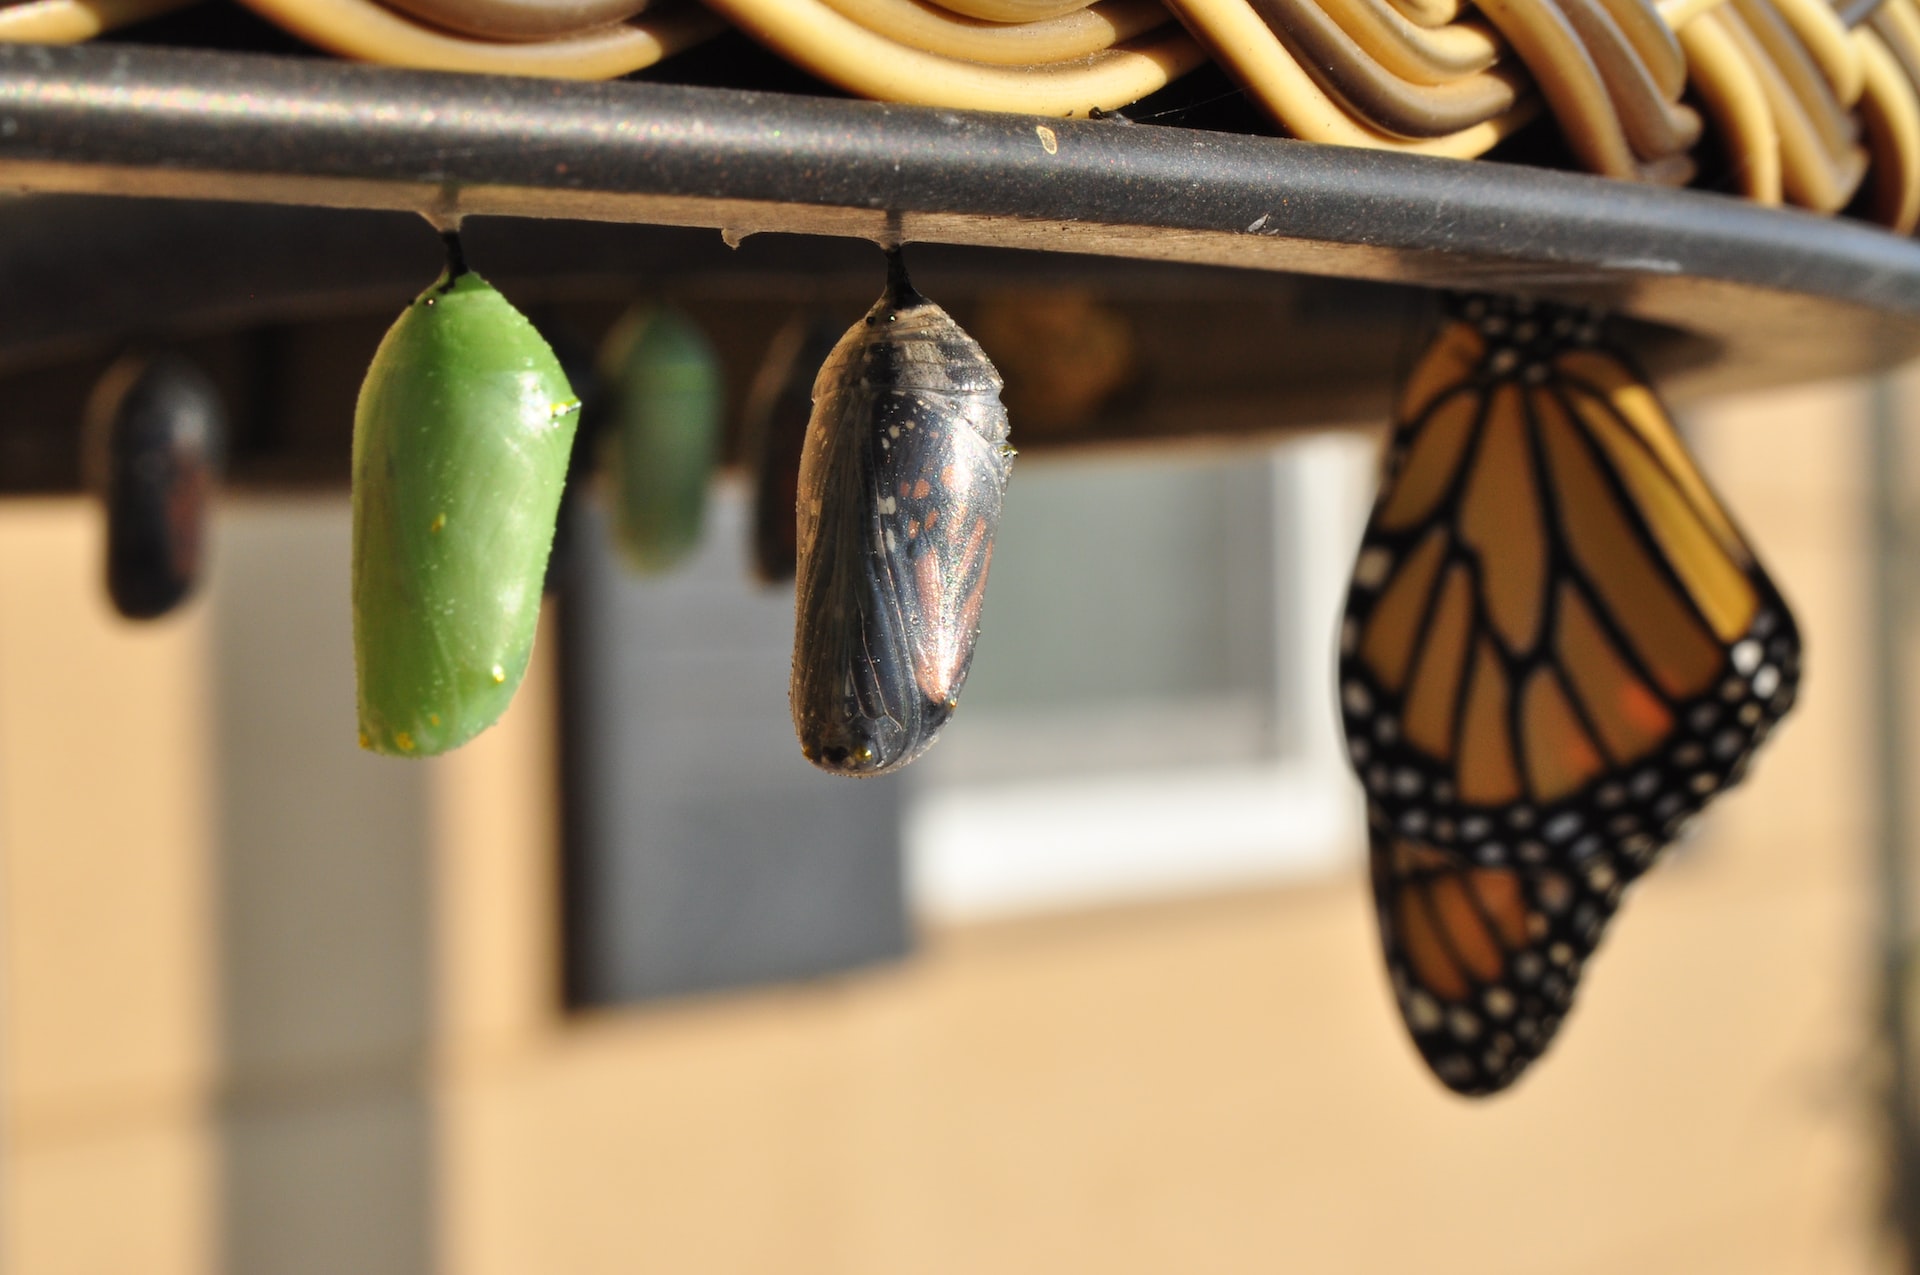 A butterfly recently emerged from its chrysalis, next to several yet to emerge.